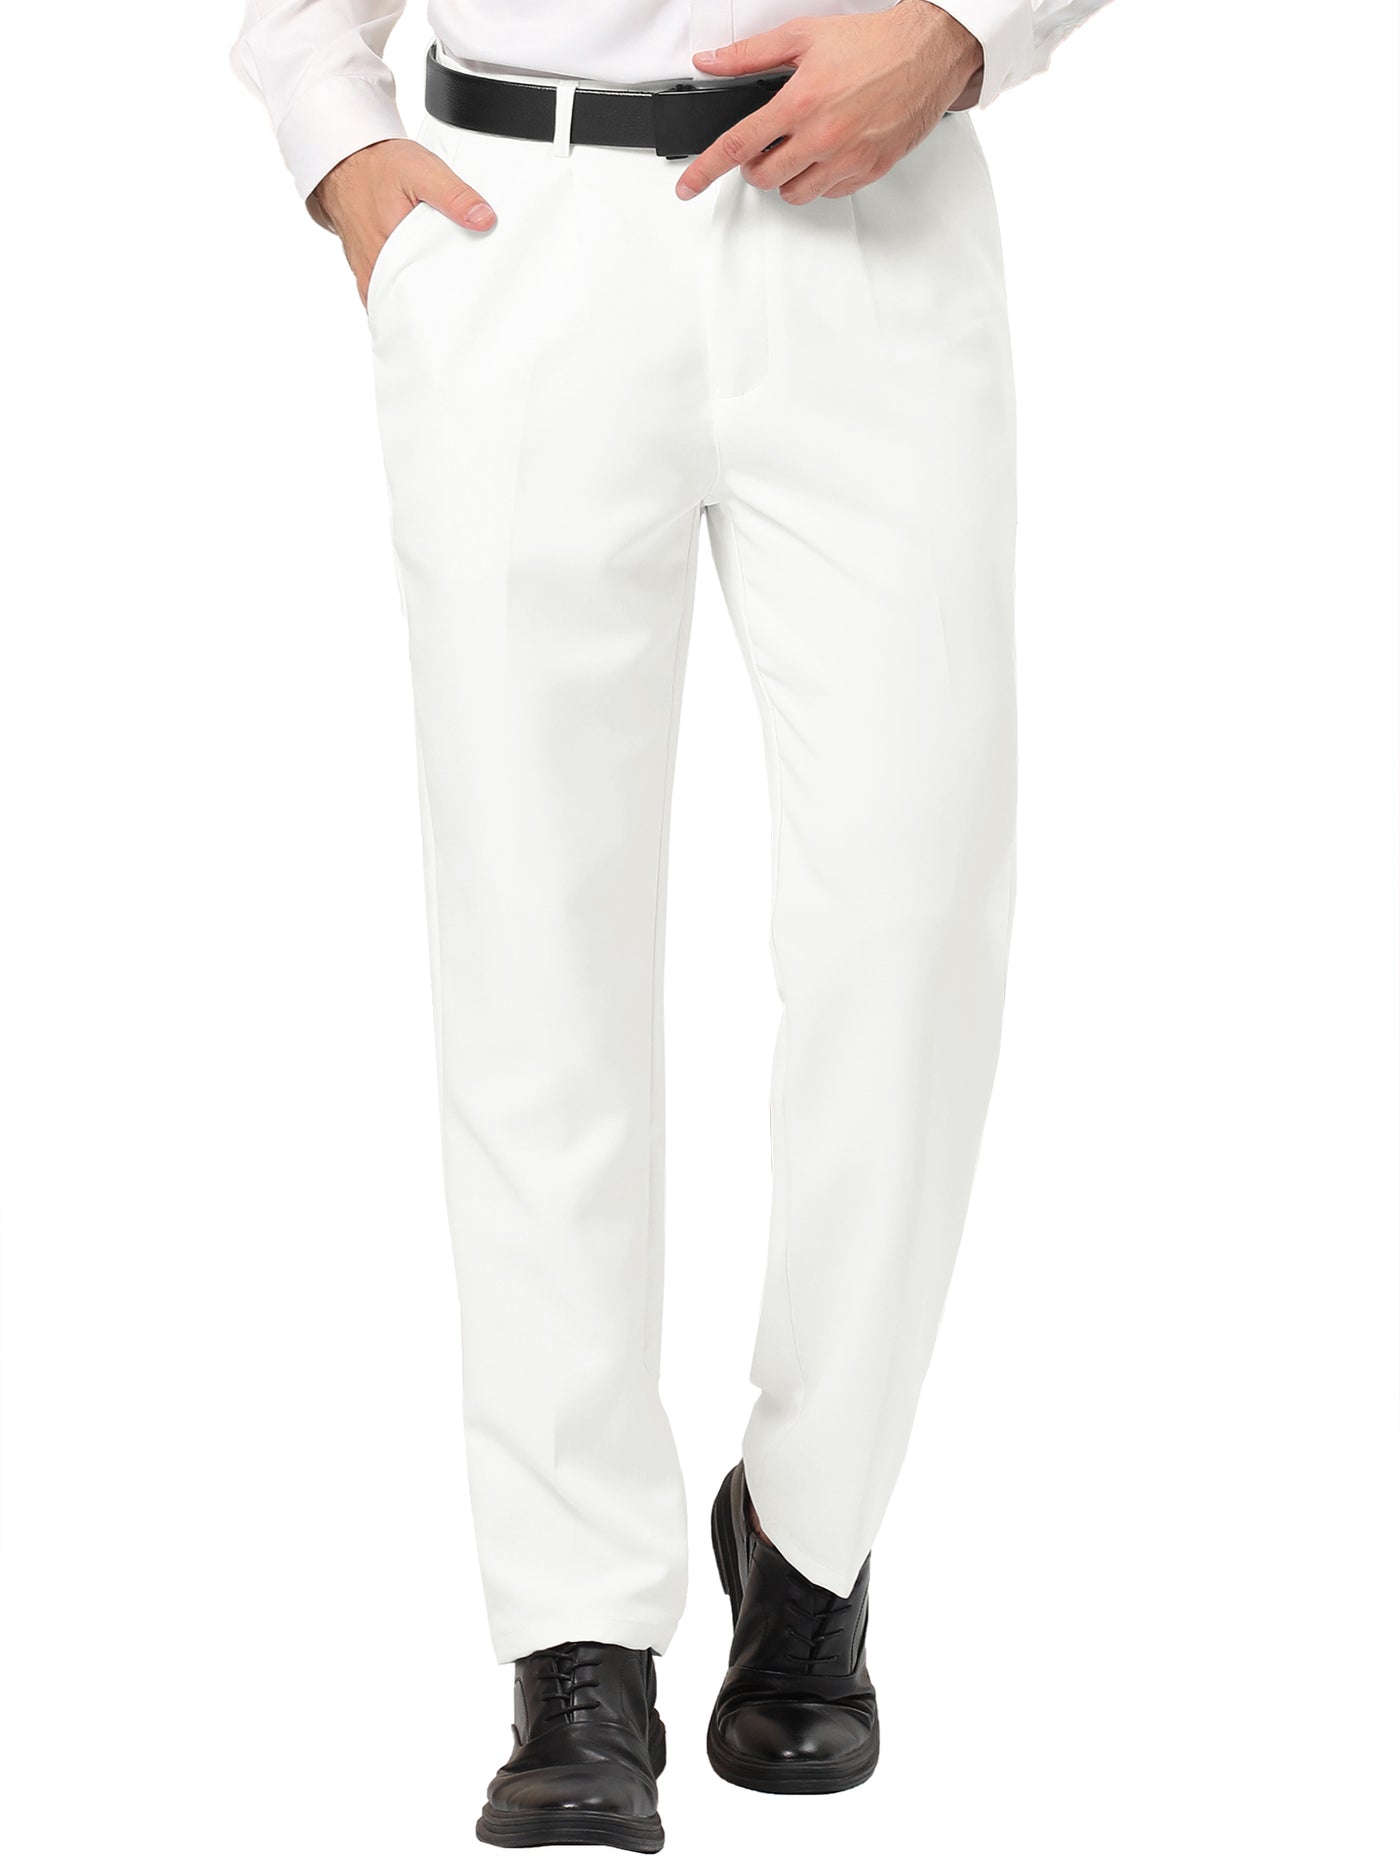 Bublédon Men's Dress Pants Solid Color Straight Fit Pleated Formal Business Trousers